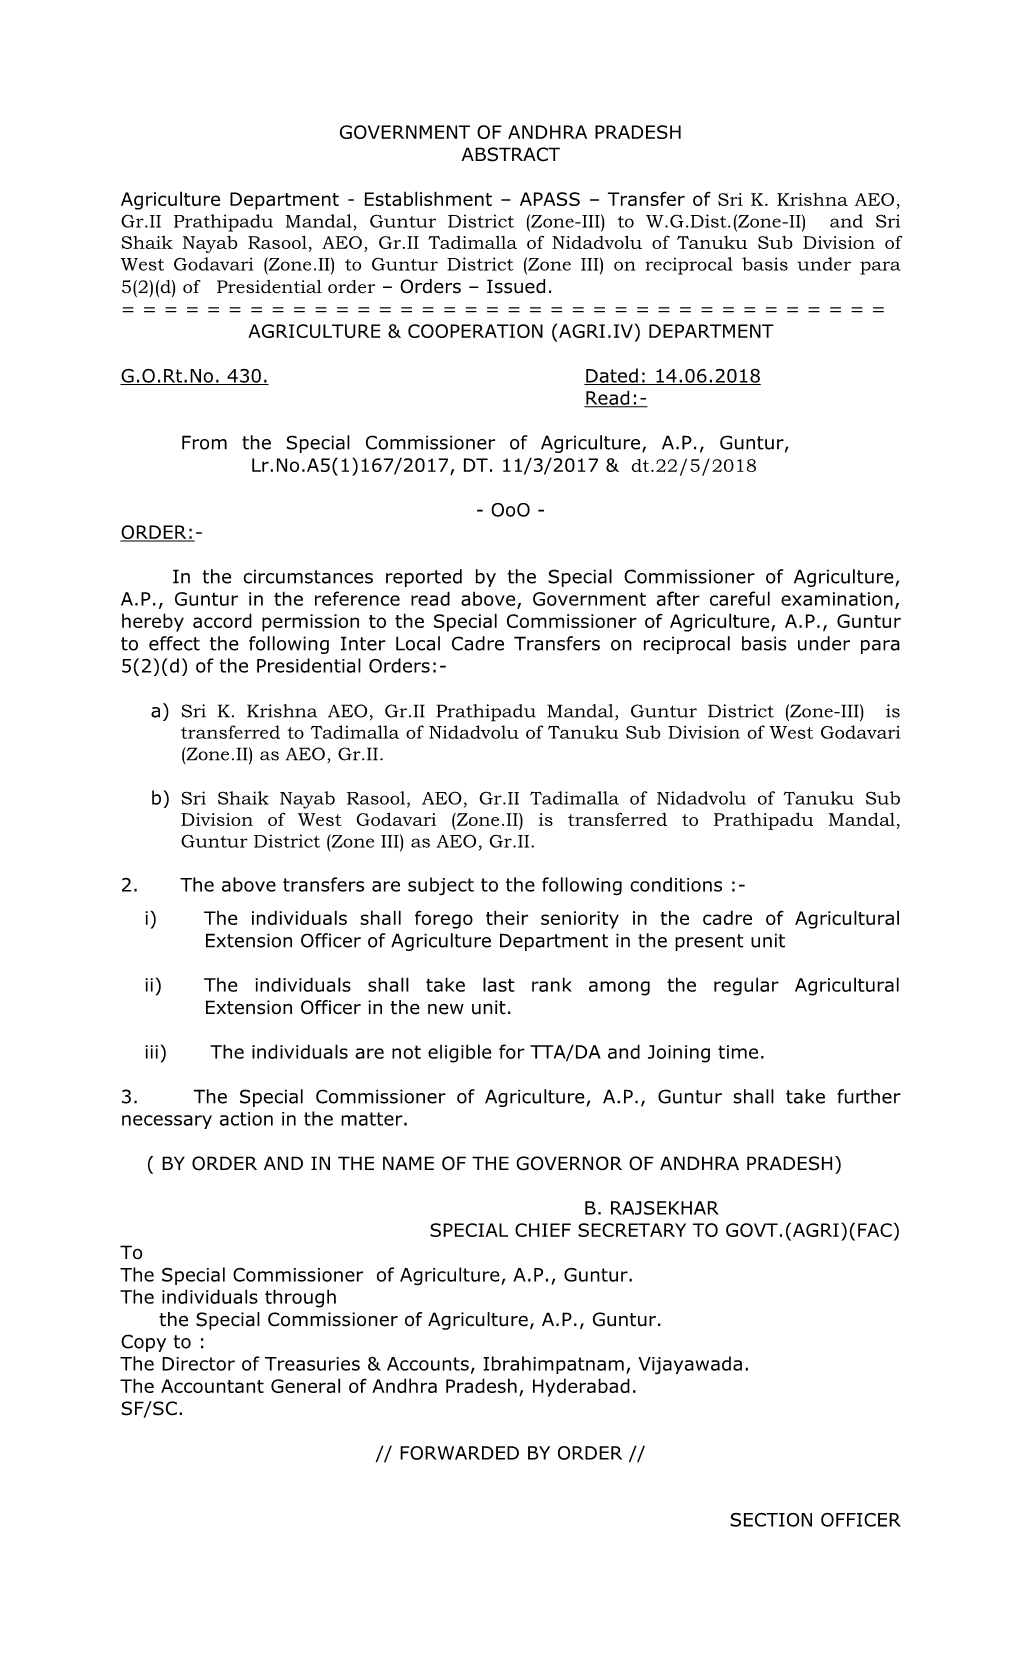 GOVERNMENT of ANDHRA PRADESH ABSTRACT Agriculture